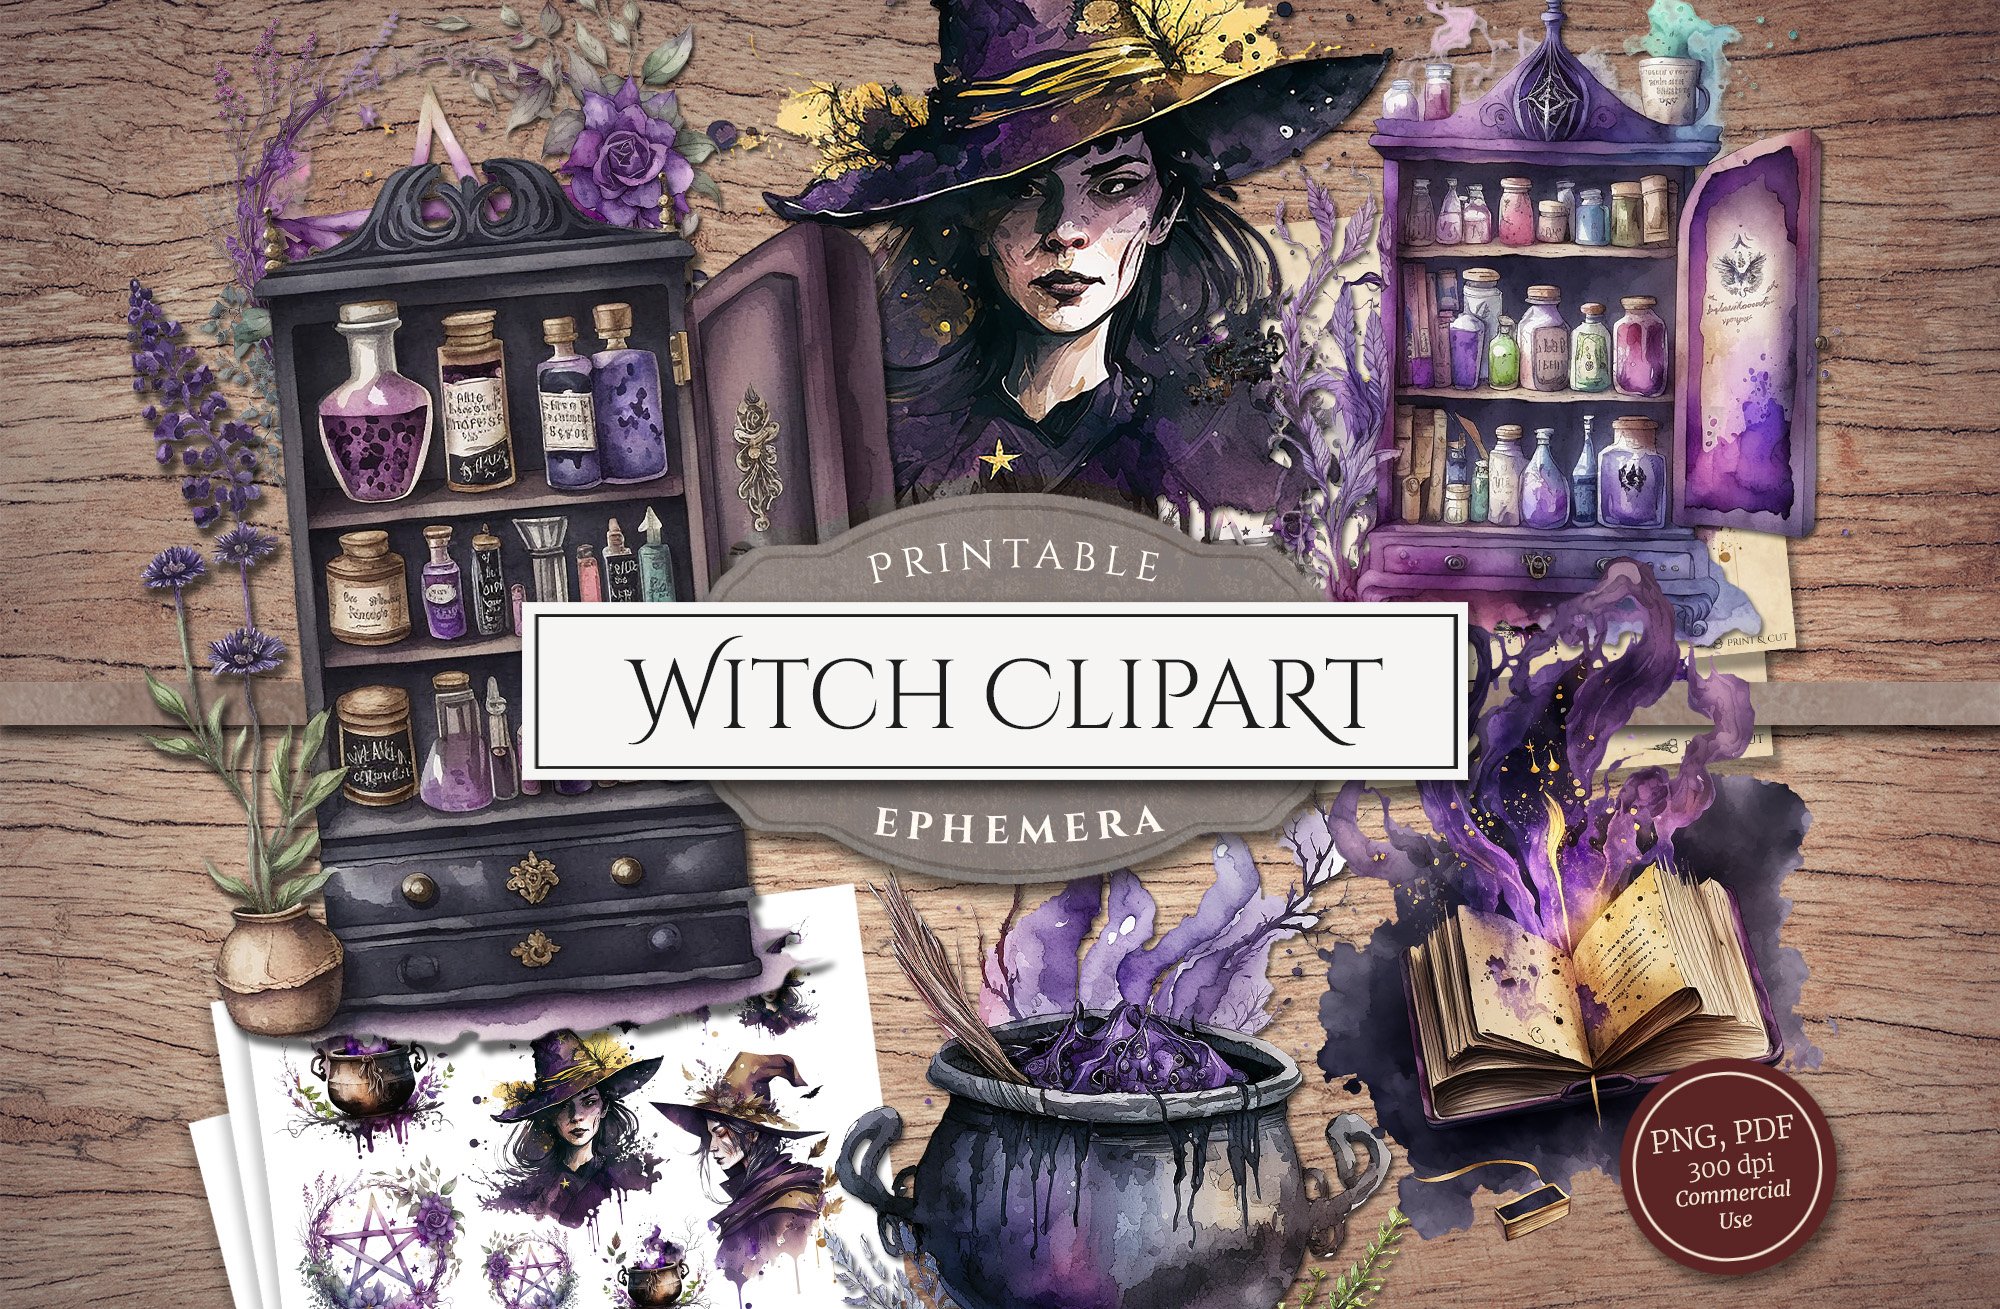 Witch Clipart Set cover image.